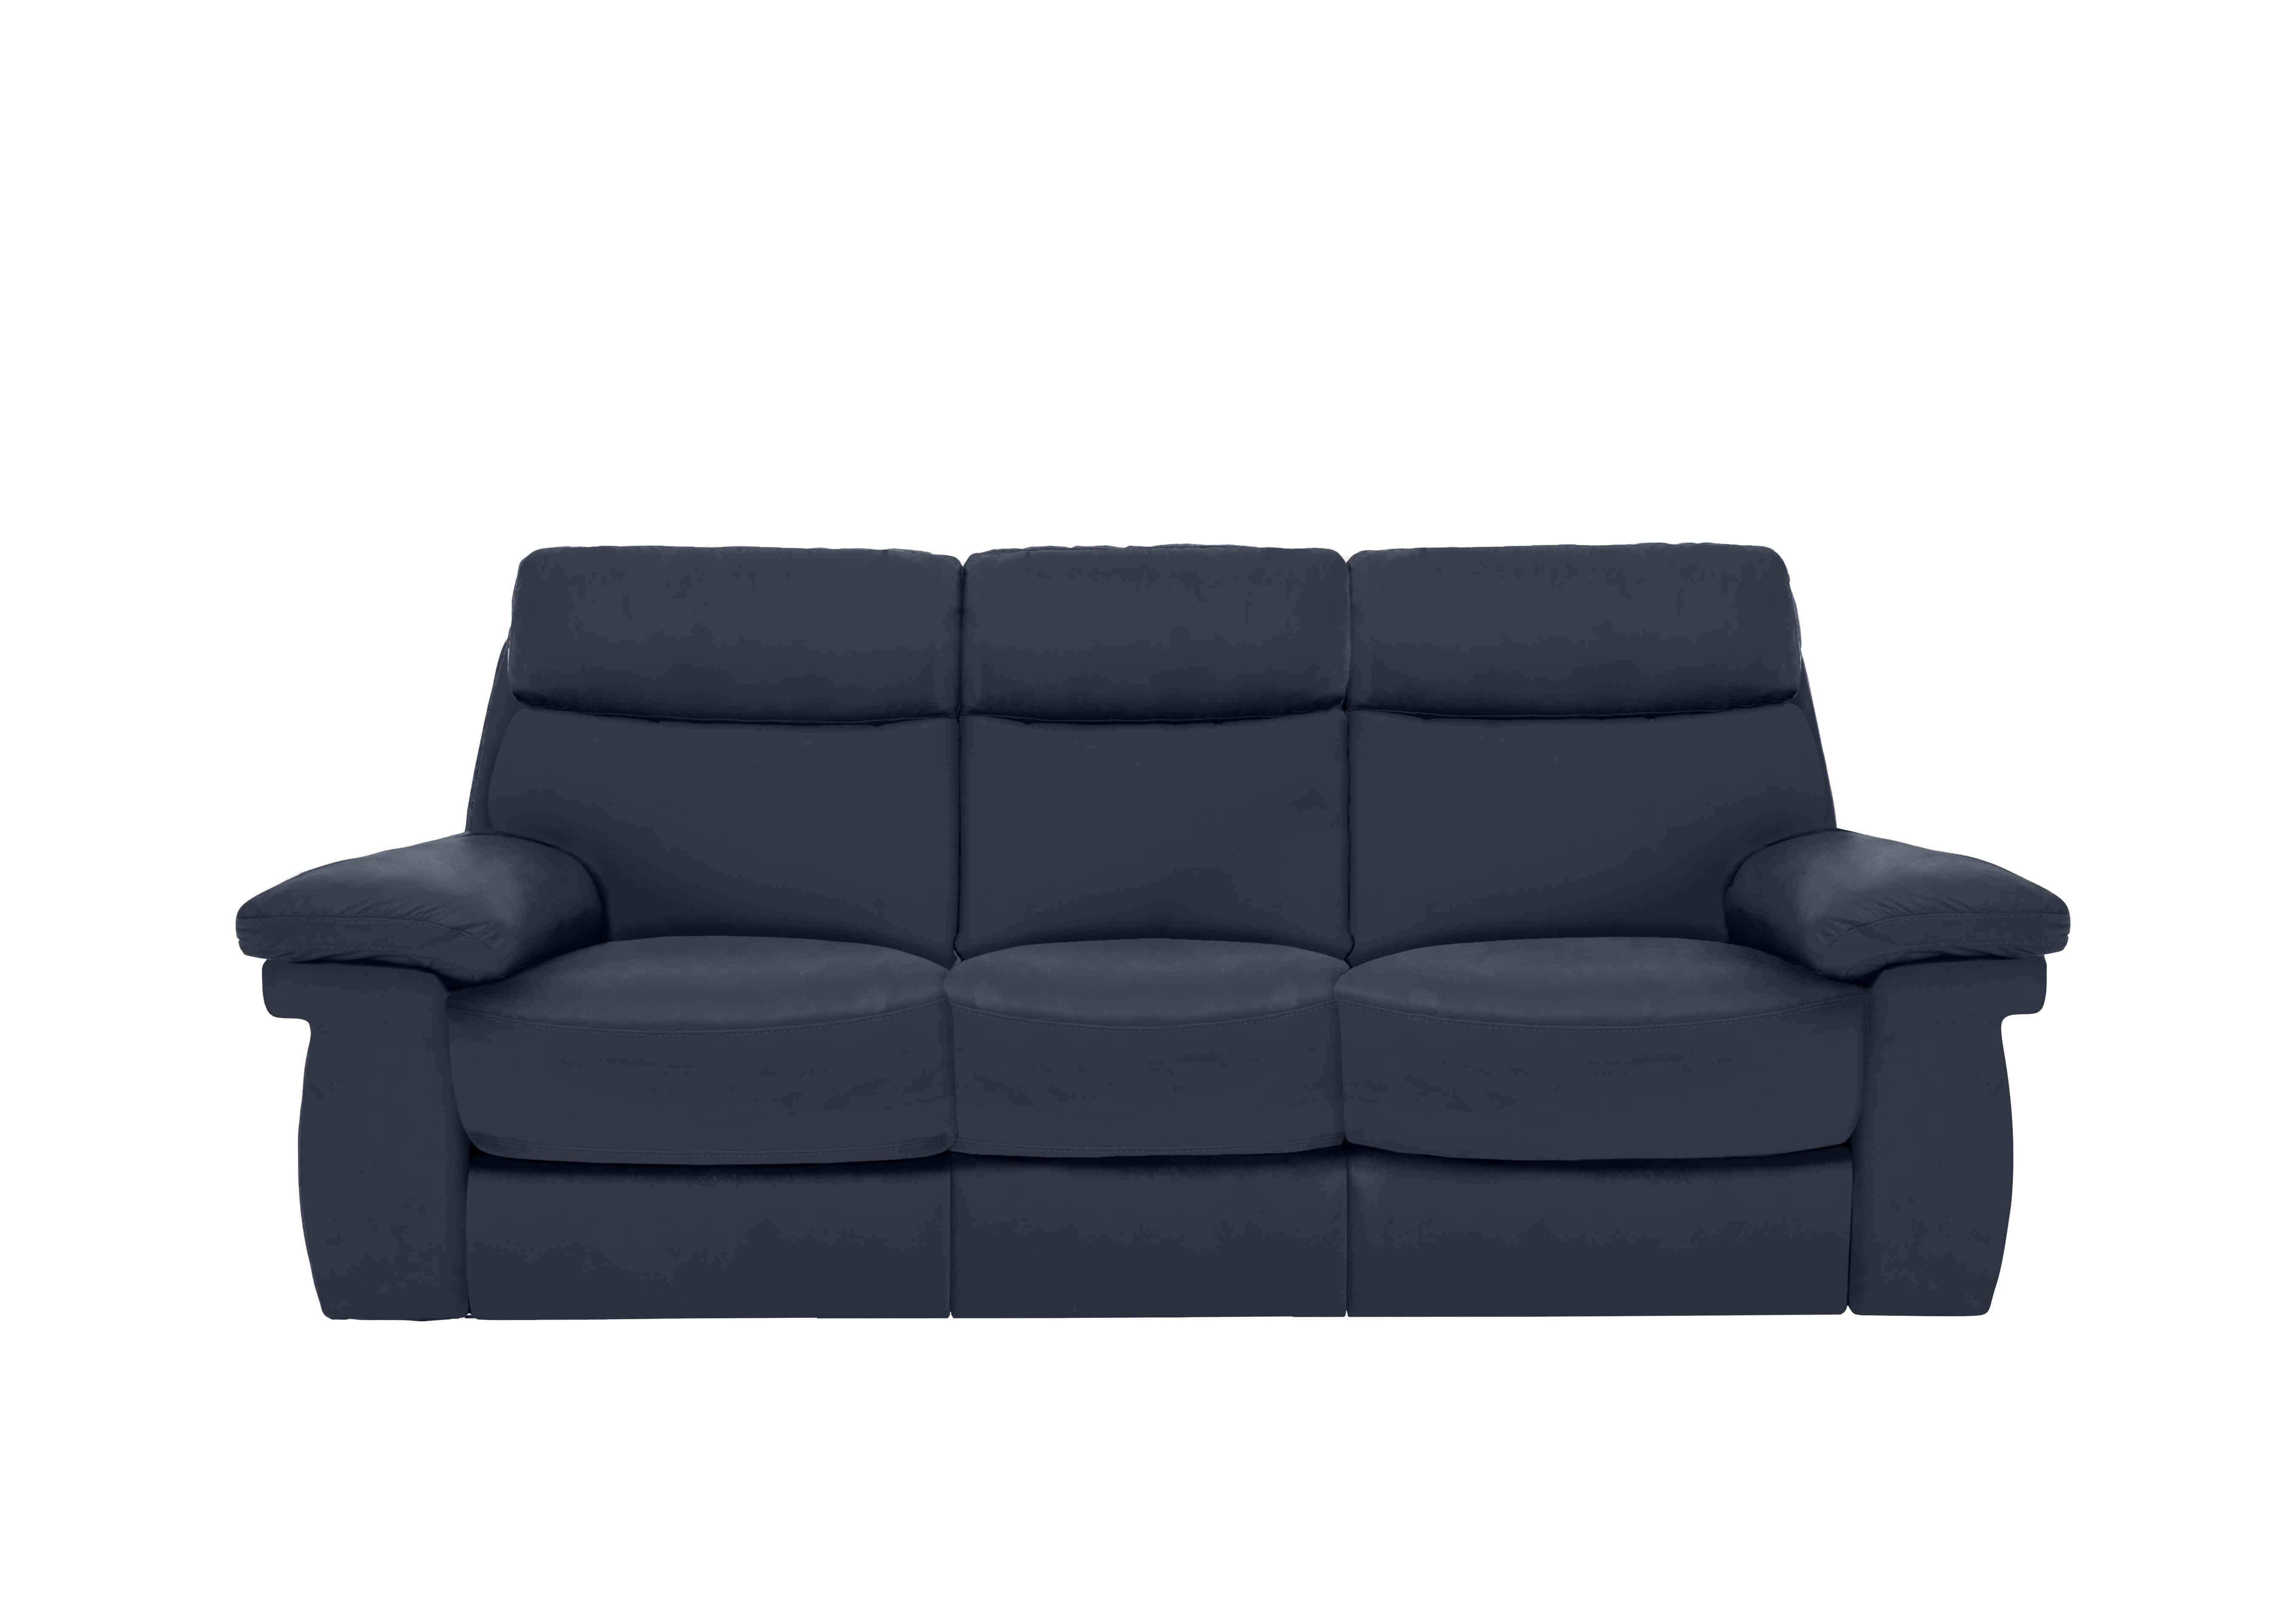 Serene 3 Seater Leather Power Recliner Sofa with Power Headrests and Power Lumbar in Bx-036c Navy on Furniture Village